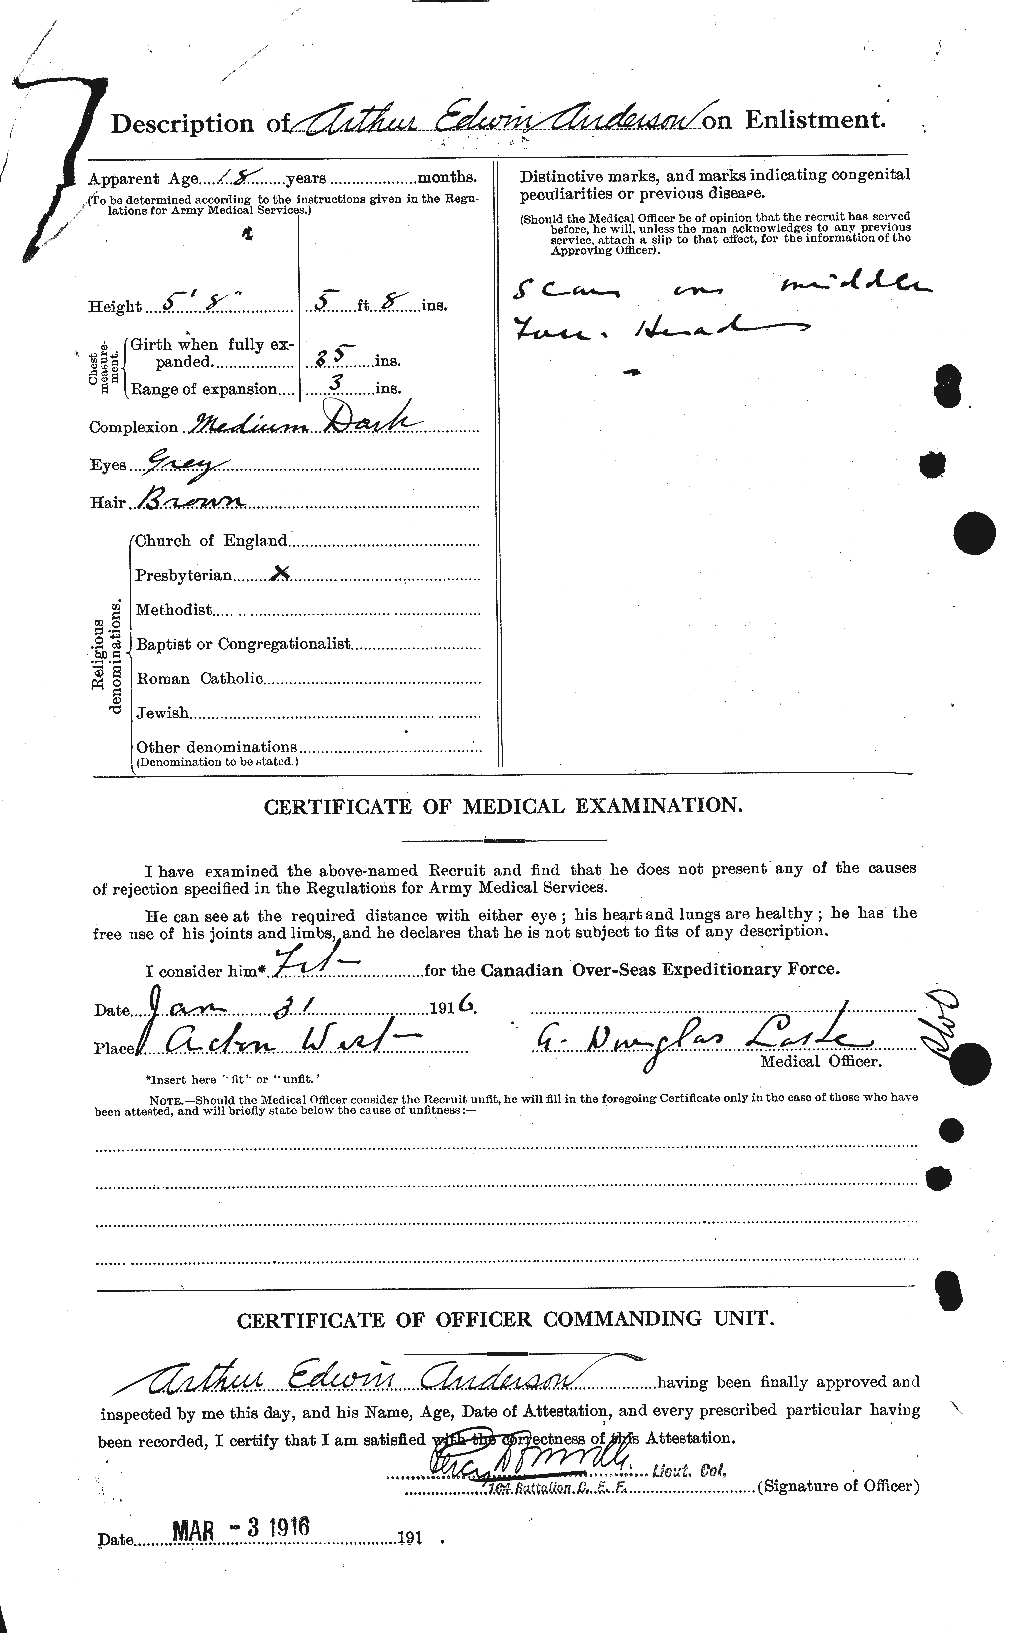 Personnel Records of the First World War - CEF 209359b